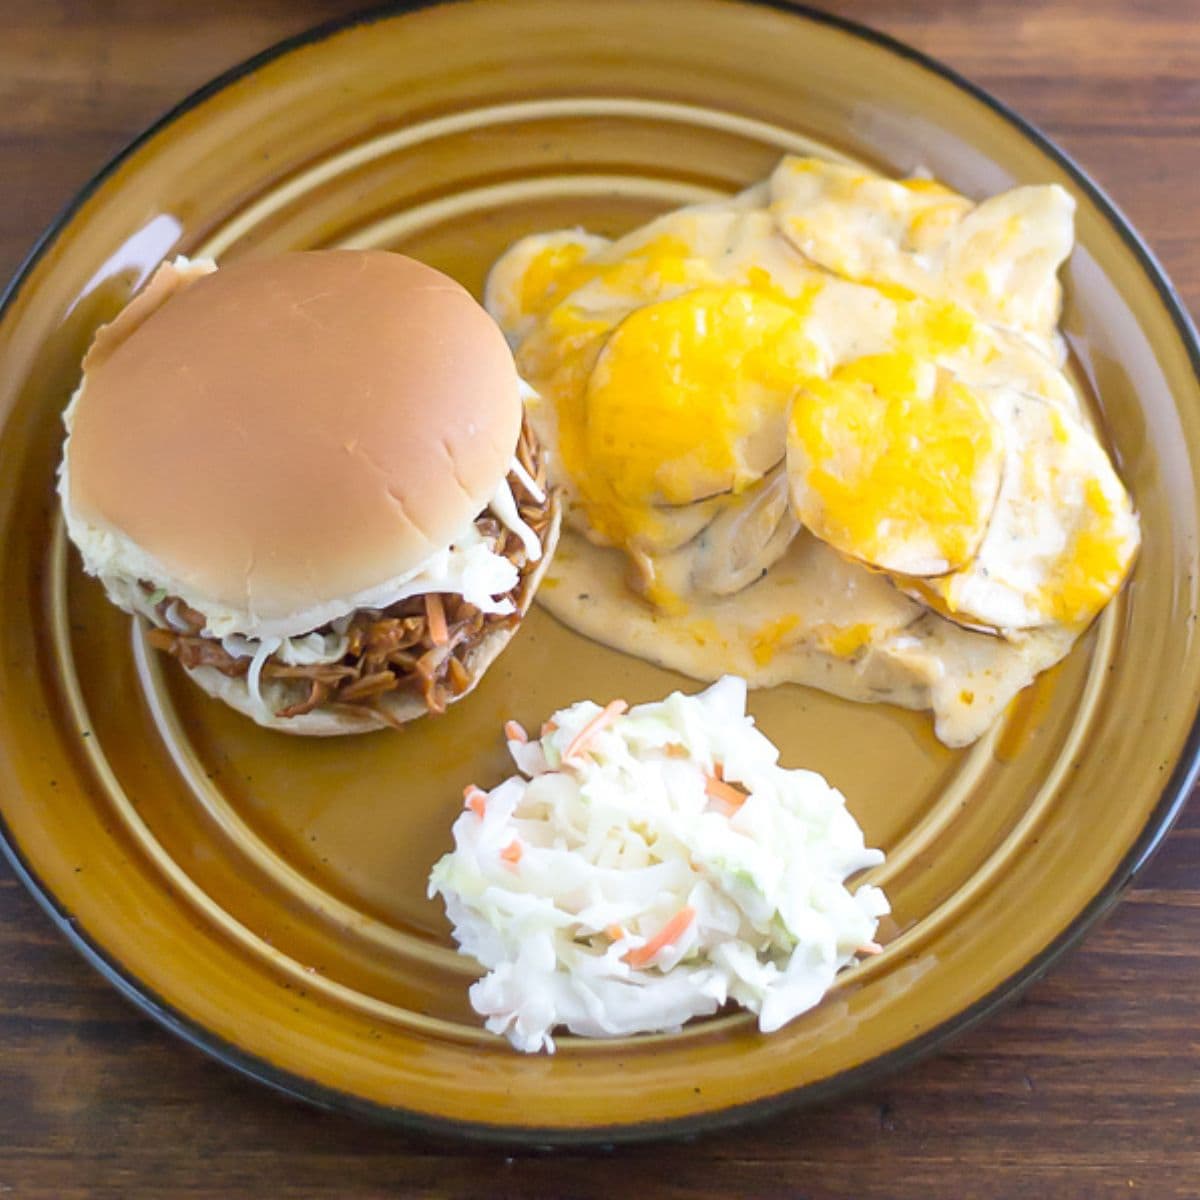 A plate with a serving of scalloped potatoes, a sandwich, and coleslaw.